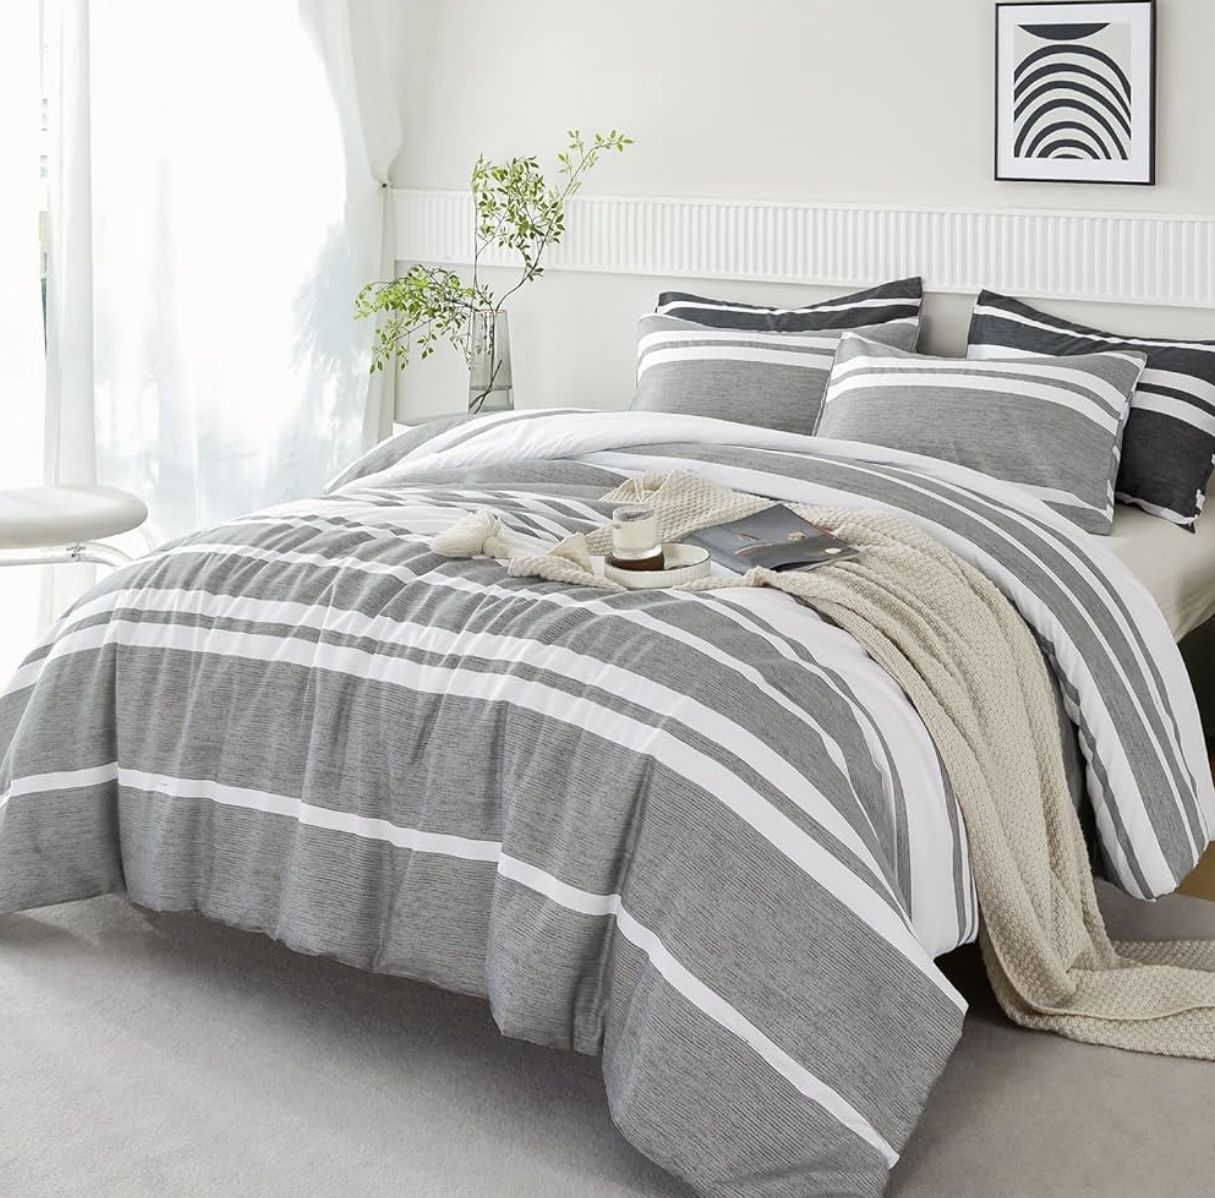 Comfortable Bed Set $29